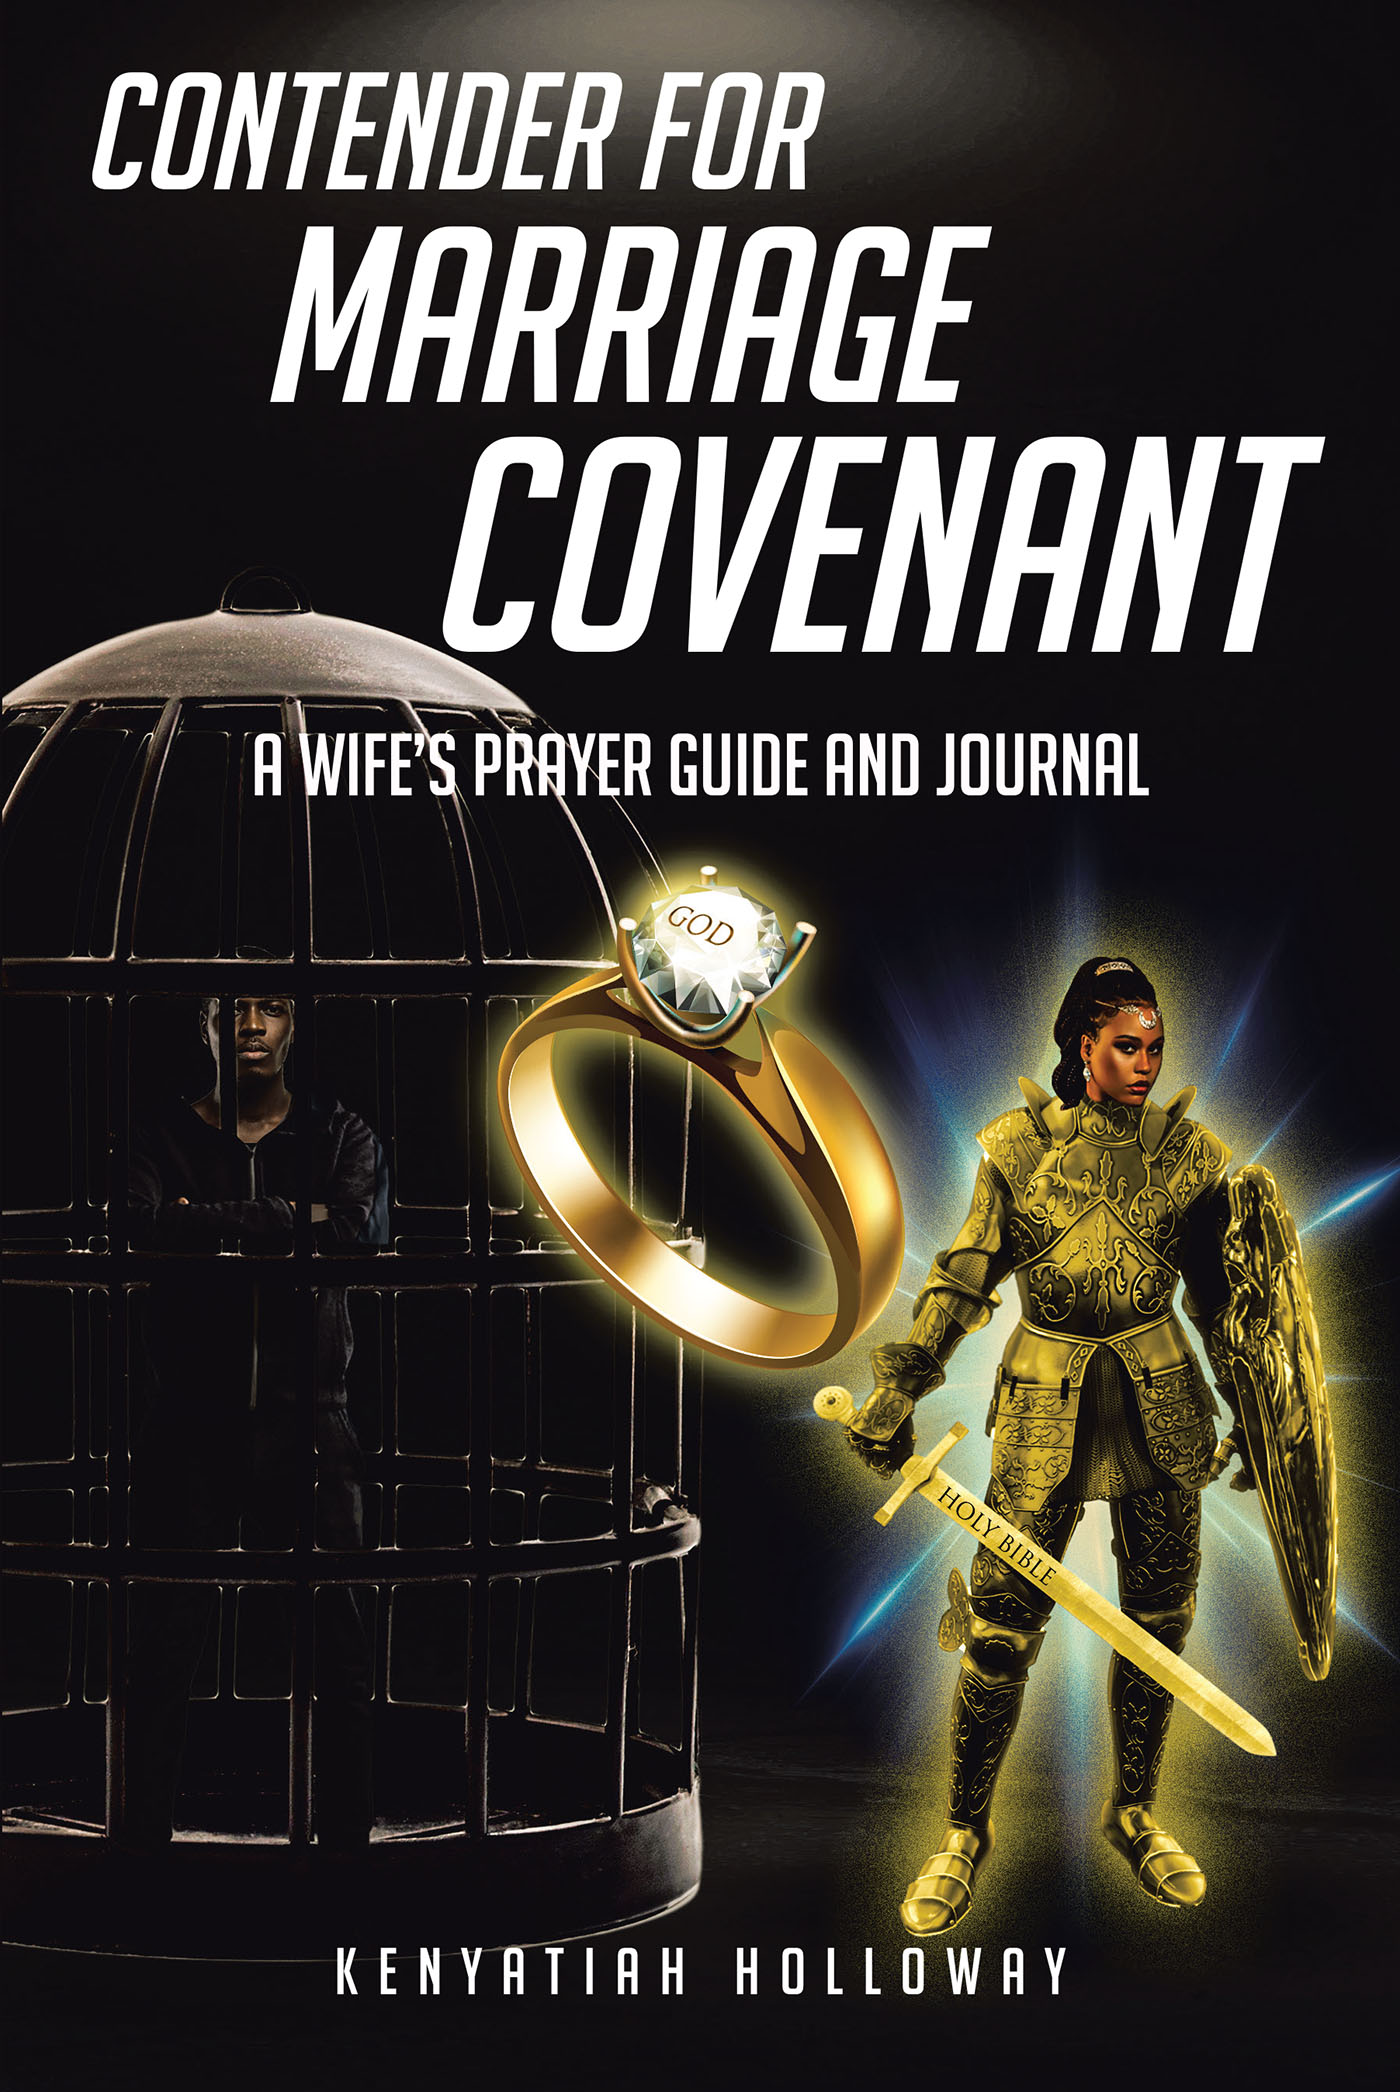 Kenyatiah Holloway’s Newly Released “Contender For Marriage Covenant: A Wife’s Prayer Guide And Journal” is an Encouraging Resource for Spiritual Growth